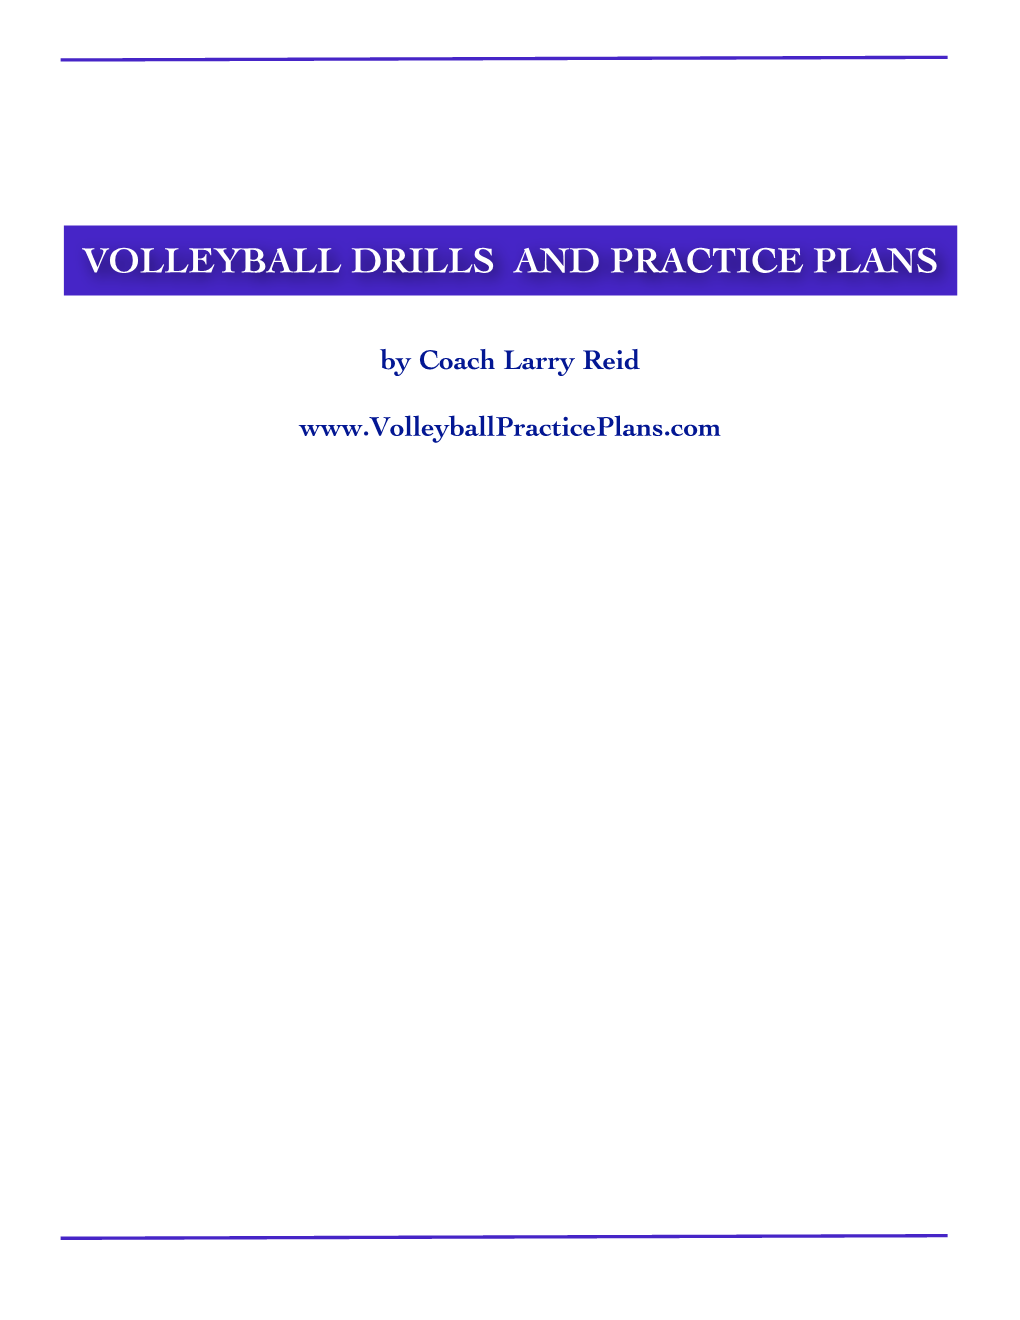 Volleyball Drills and Practice Plans